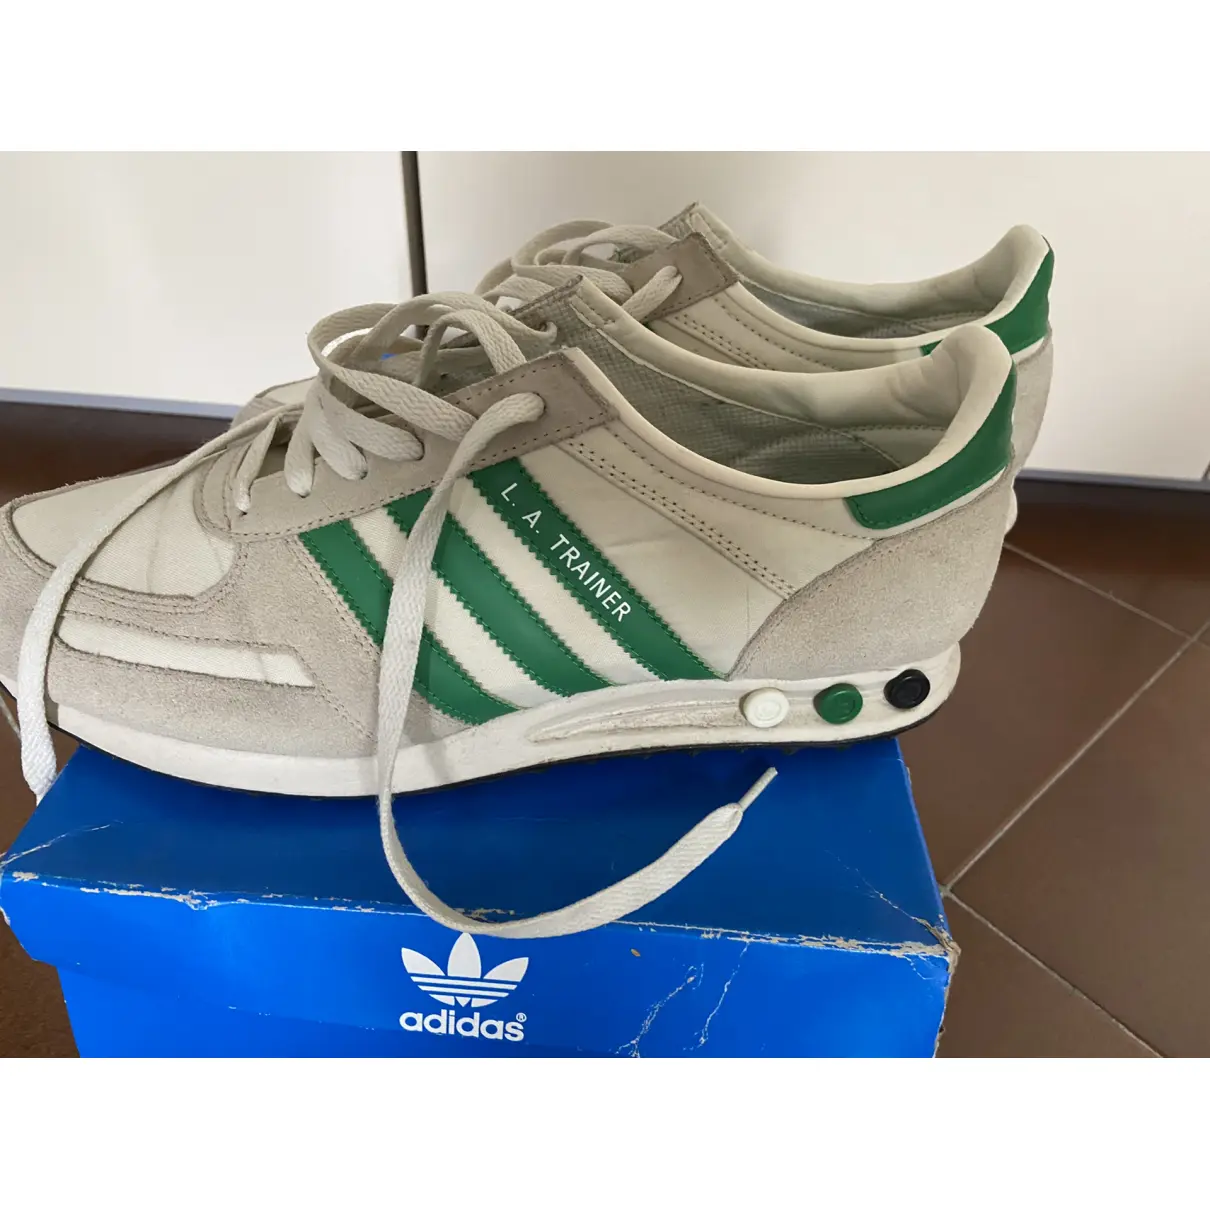 Buy Adidas Low trainers online